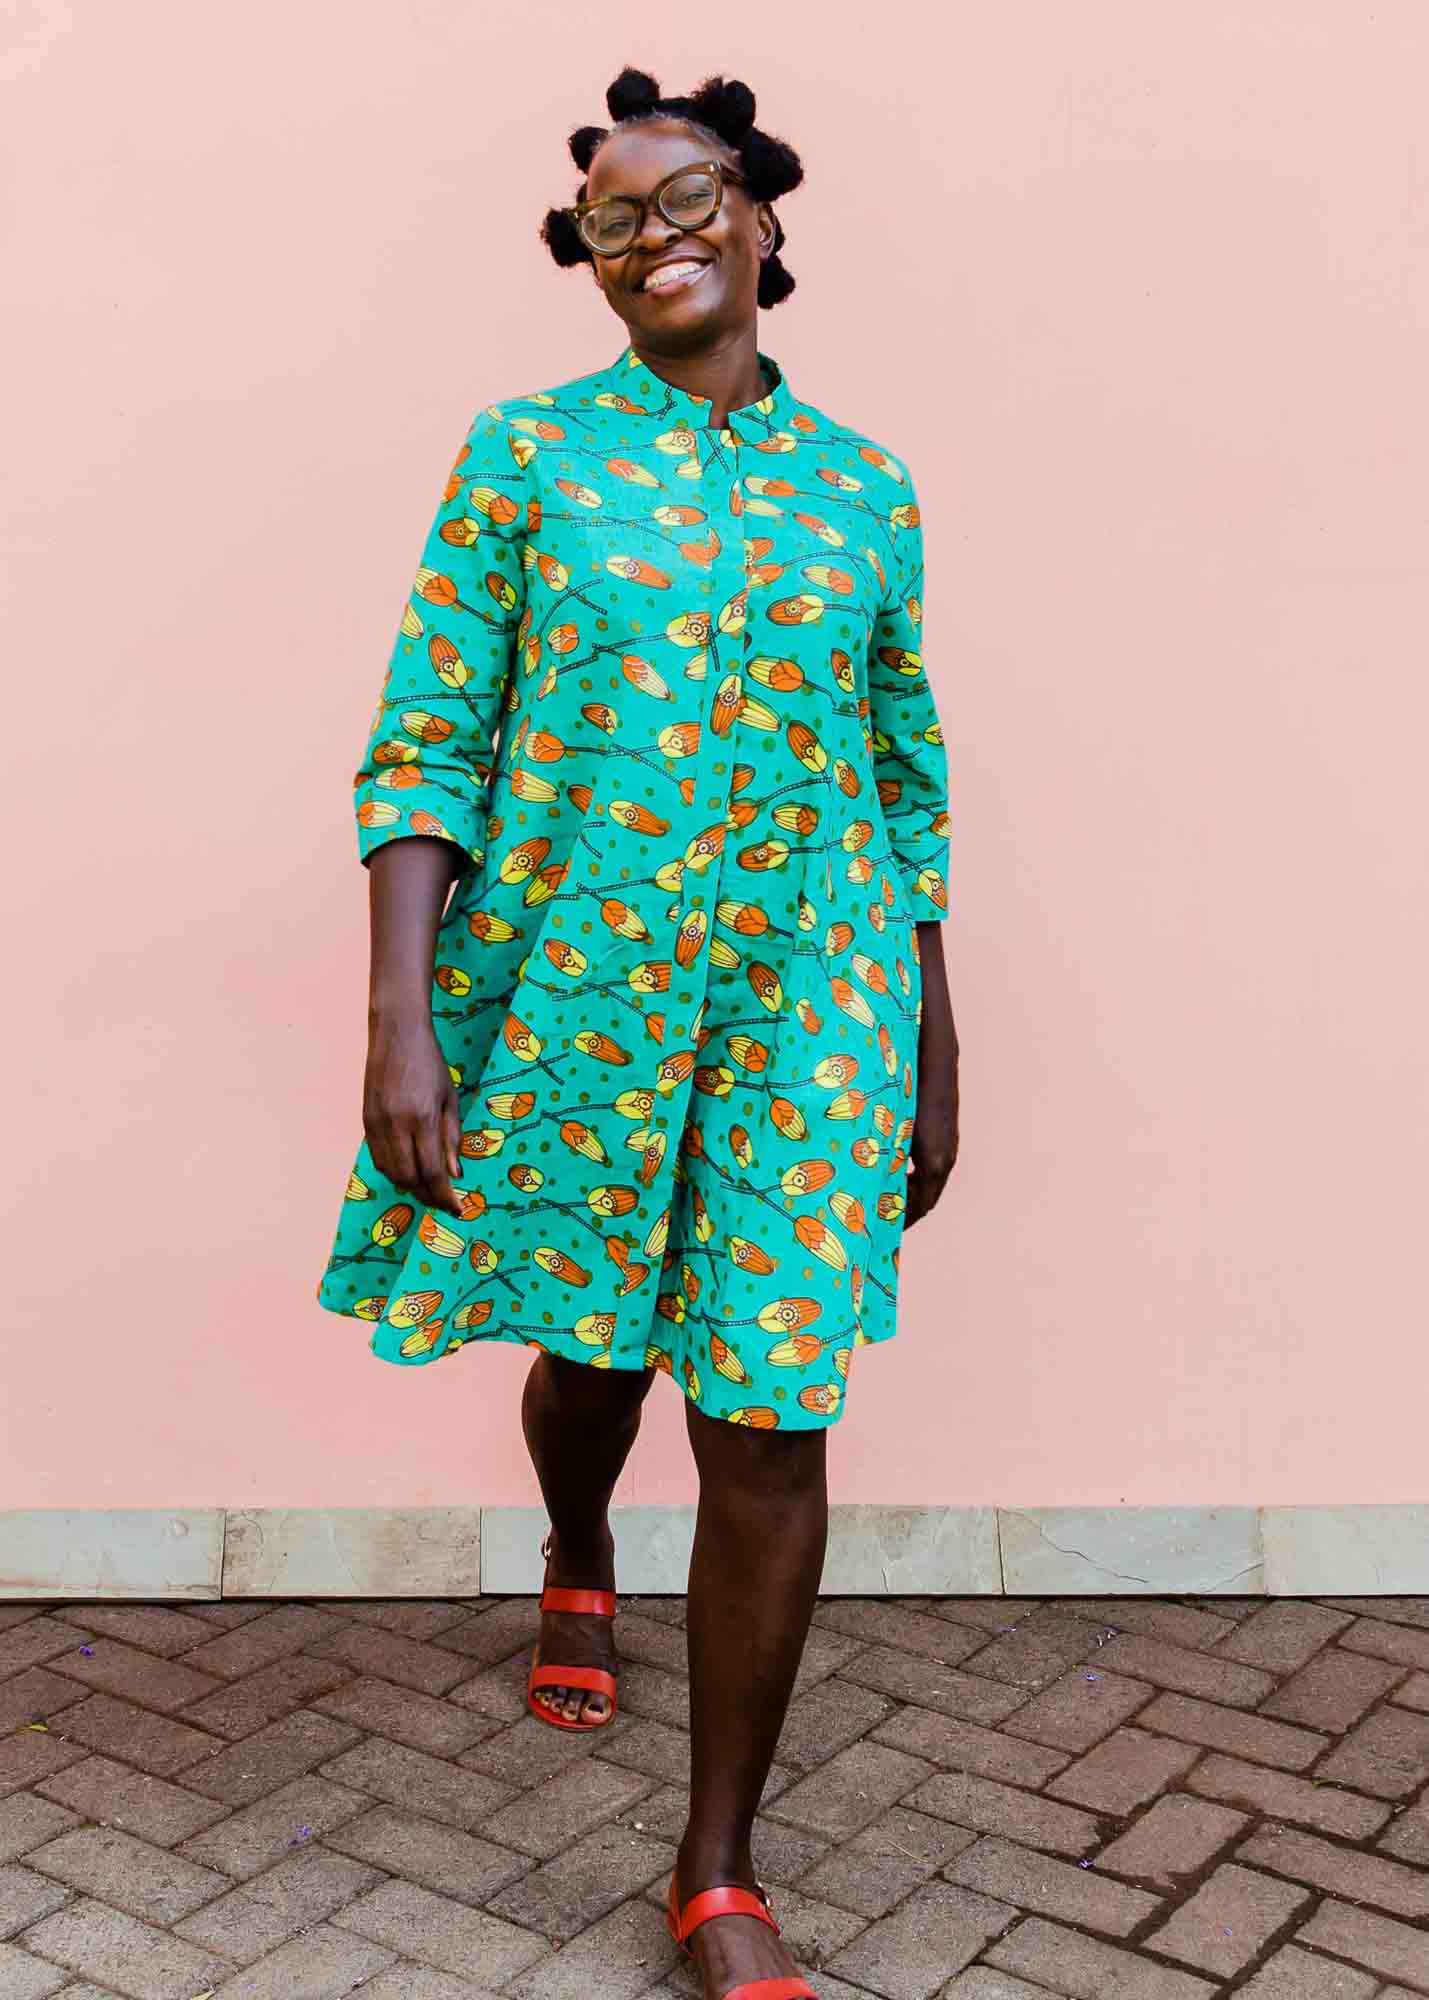 model wearing a teal, orange and yellow pod design dress